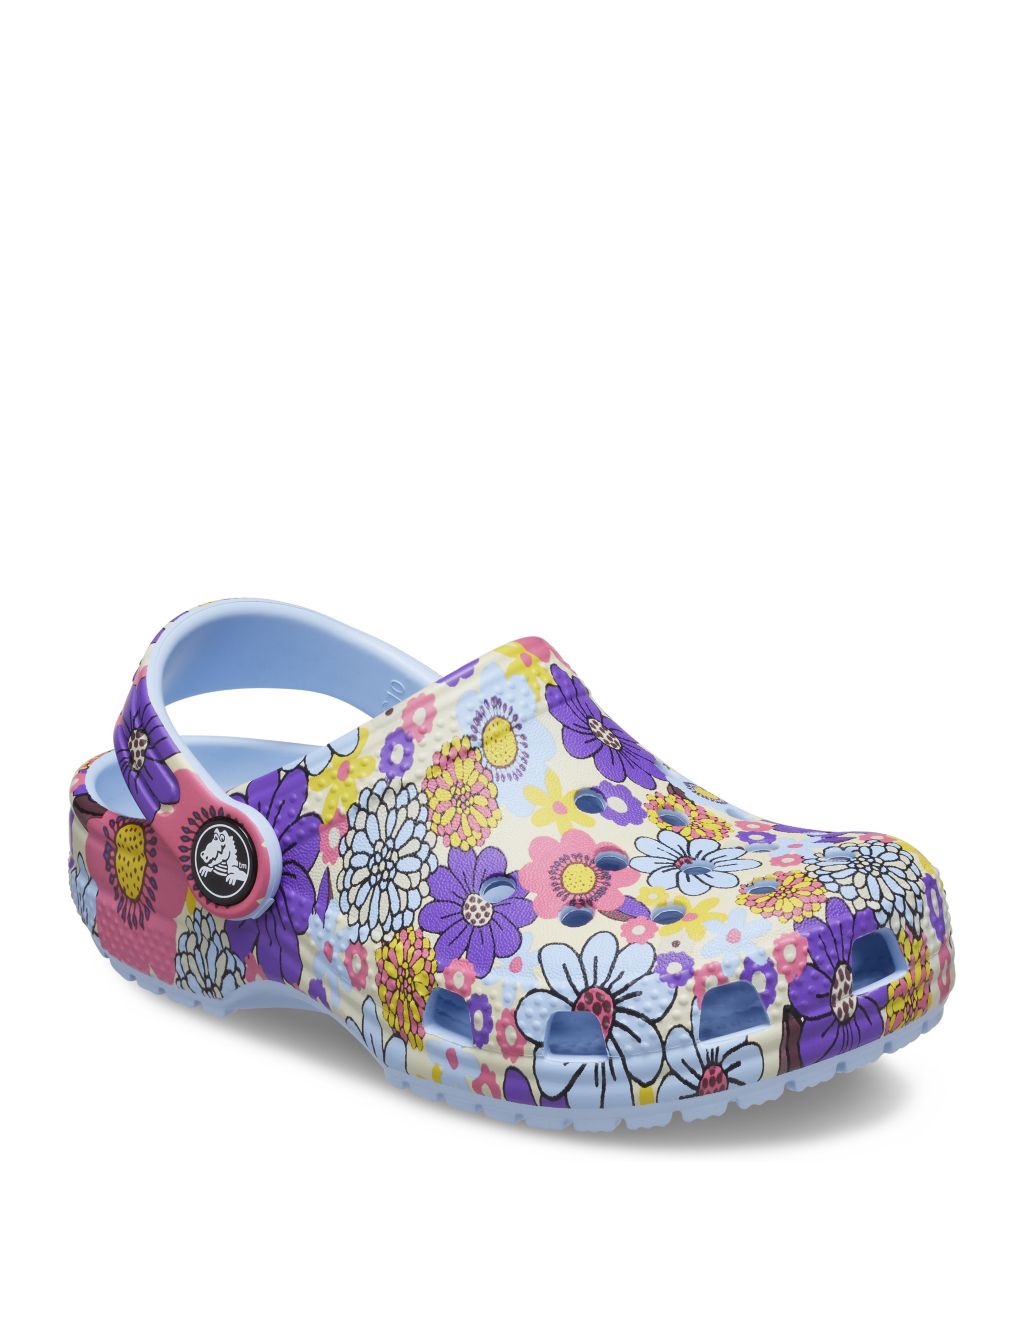 Kids' Classic Retro Floral Clogs (4 Small - 10 Small) image 6